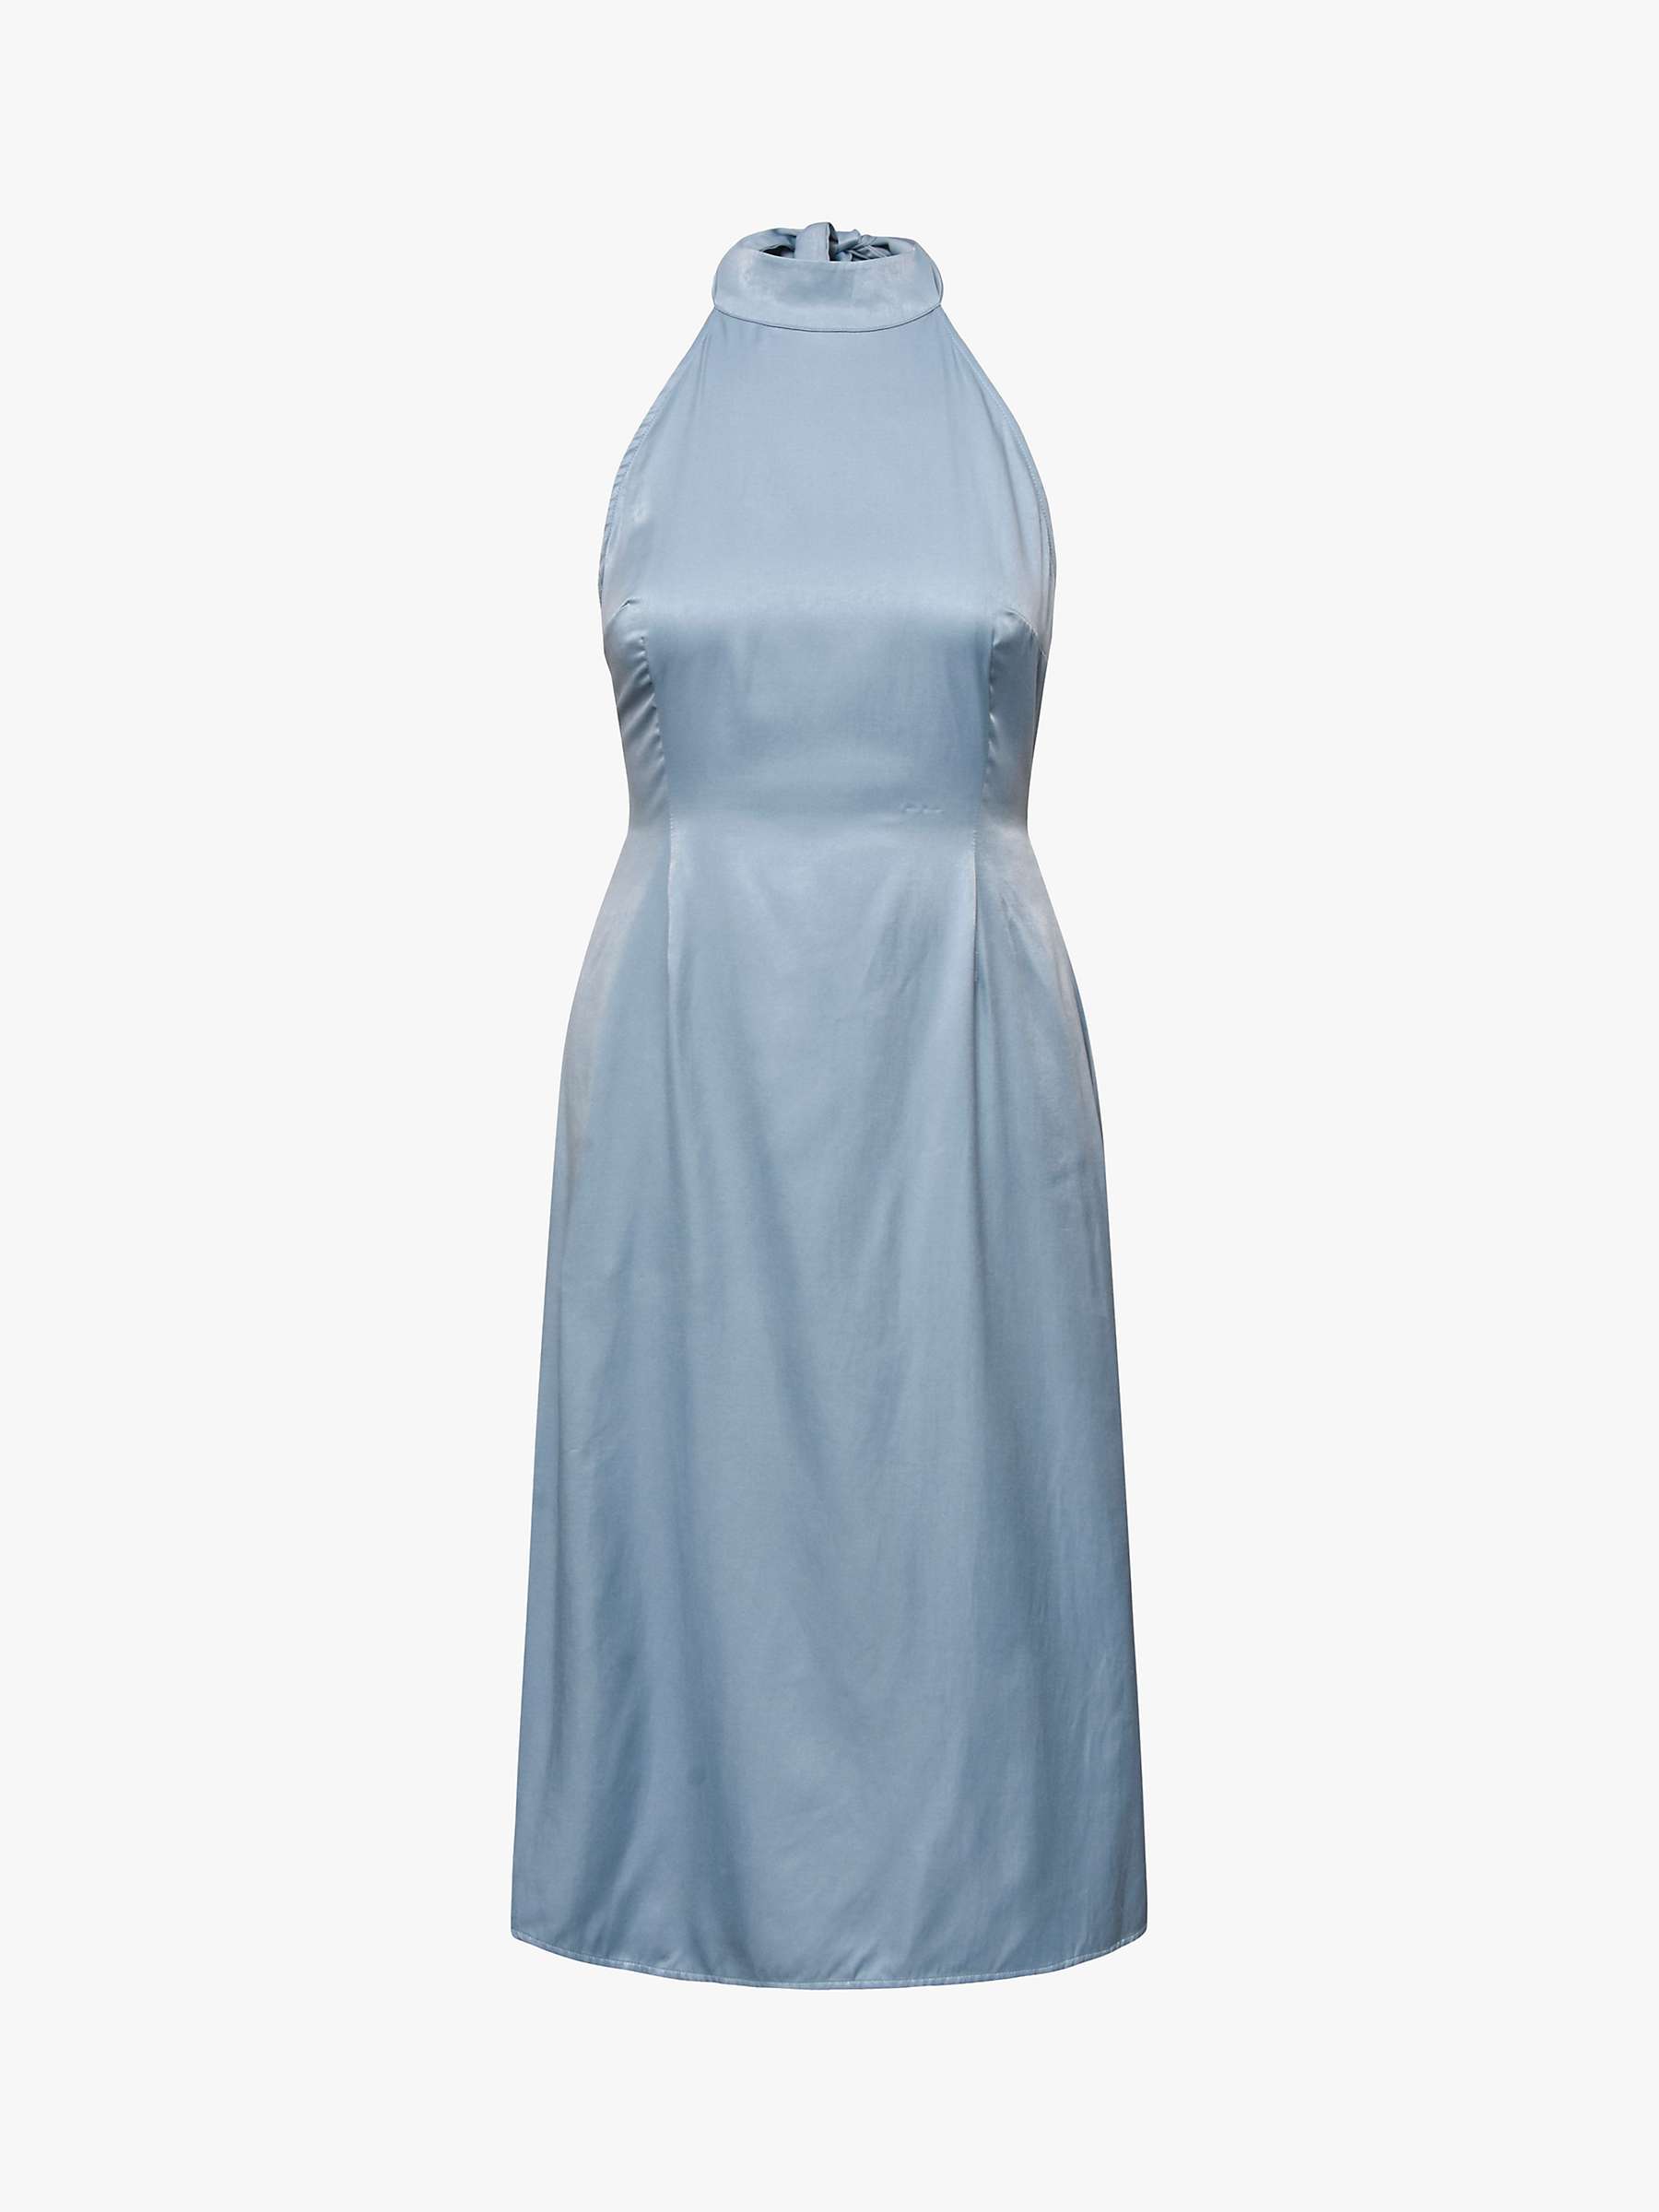 Buy A-VIEW Carry Sateen Midi Dress, 281 Blue Online at johnlewis.com